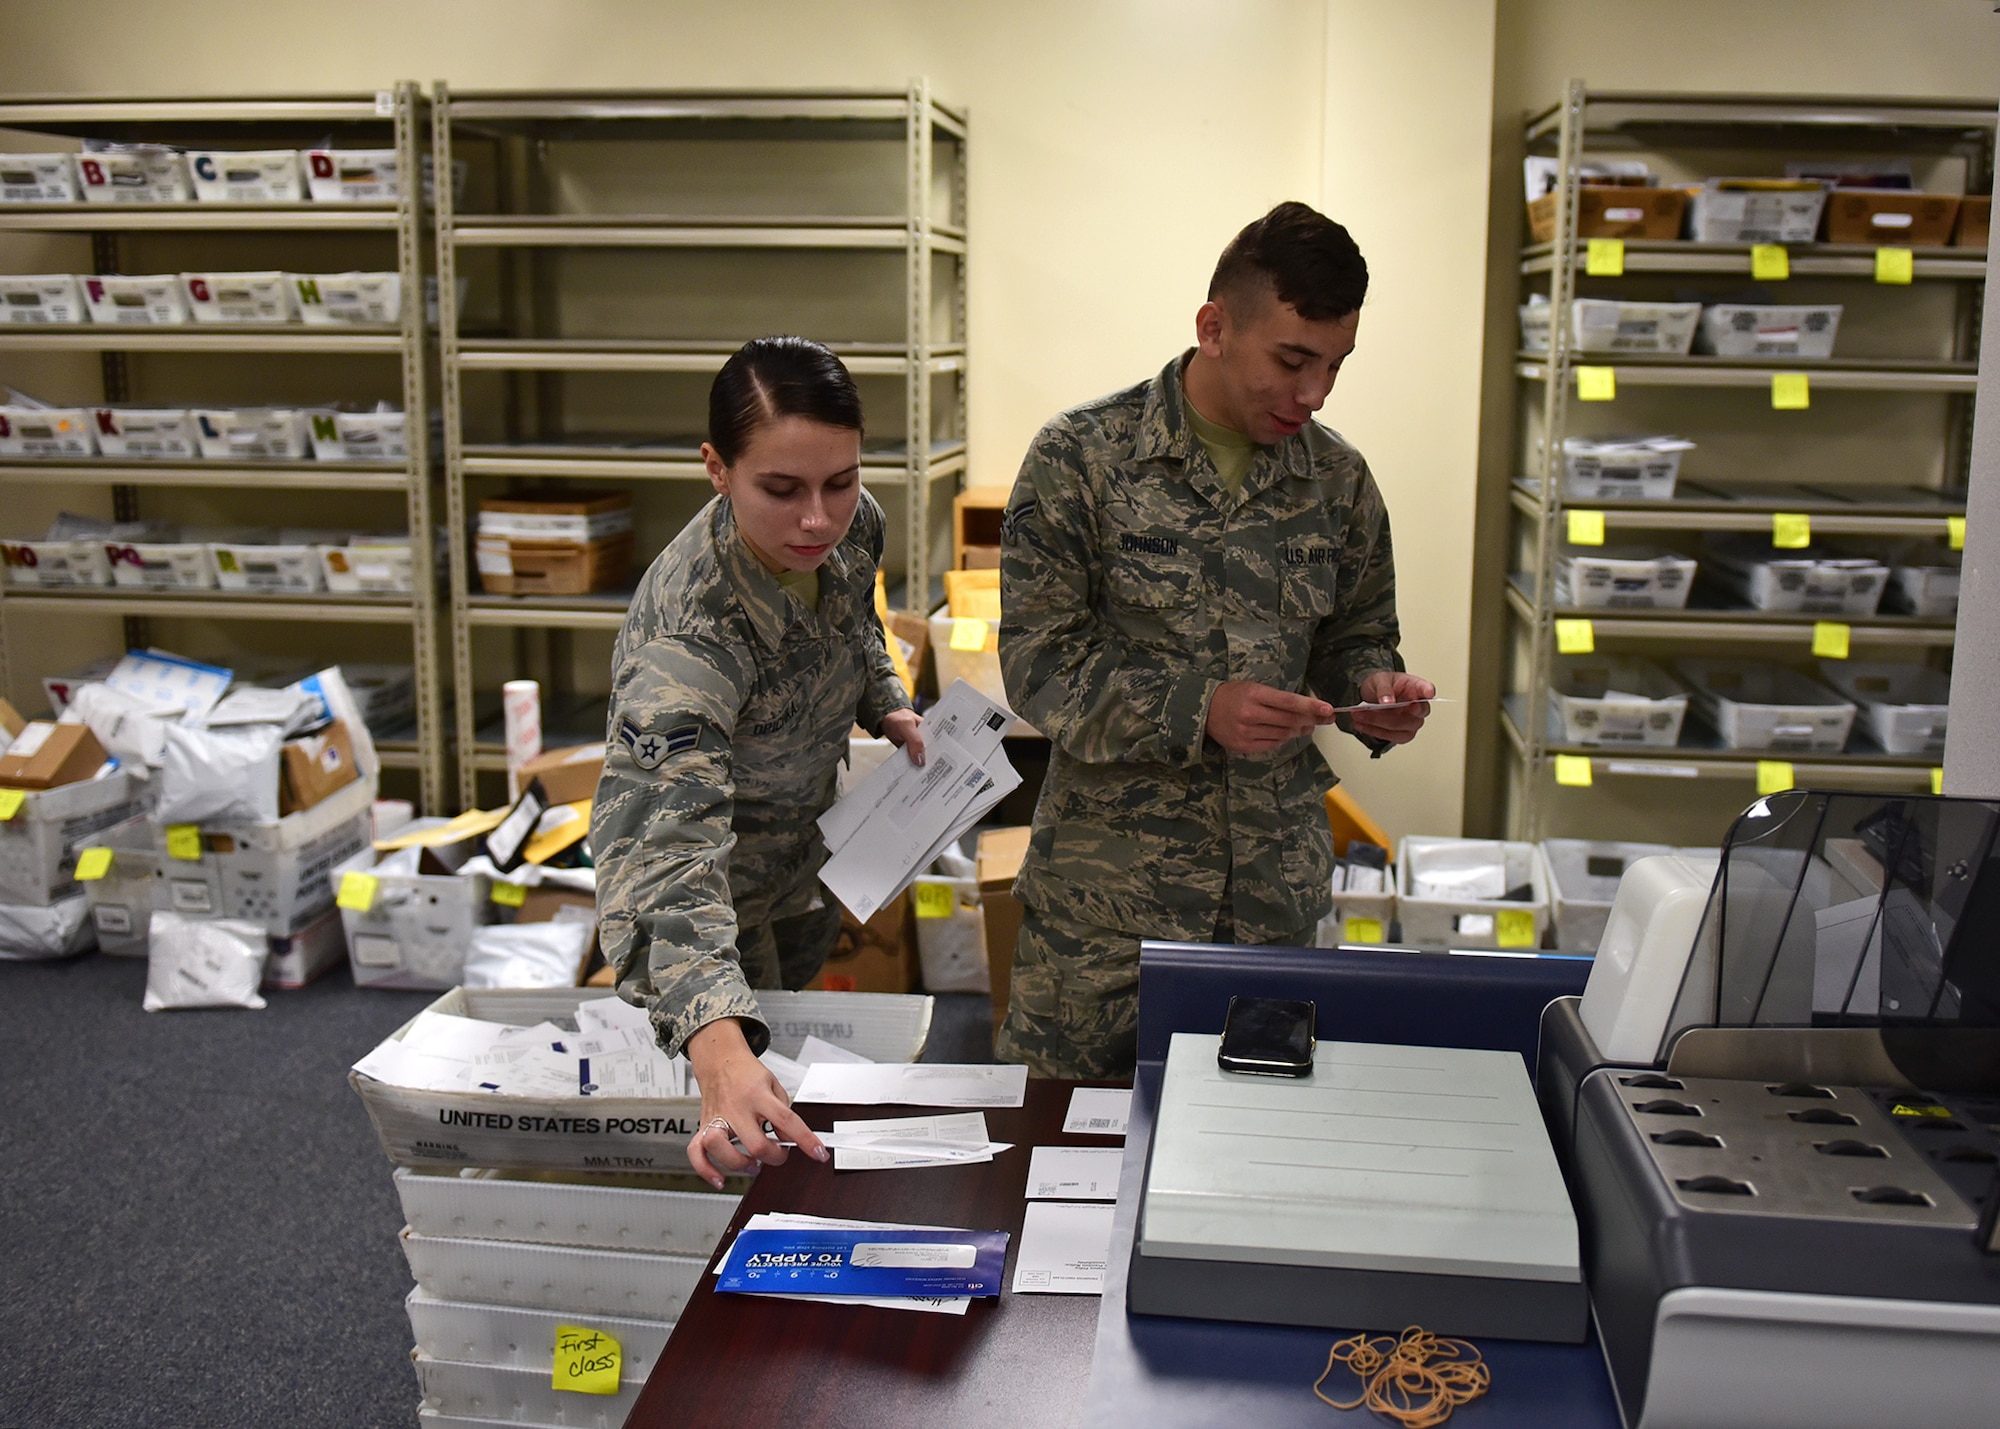 U.S. Air Force Airmen 1st Class Isabella Opichka, left, and Gerald Johnson, both 325th Force Support Squadron official mail technicians, organize mail at Tyndall Air Force Base, Fla., Nov. 12, 2018. The mail center is slated to be fully operational beginning Nov. 13. (U.S. Air Force photo by Senior Airman Isaiah J. Soliz)